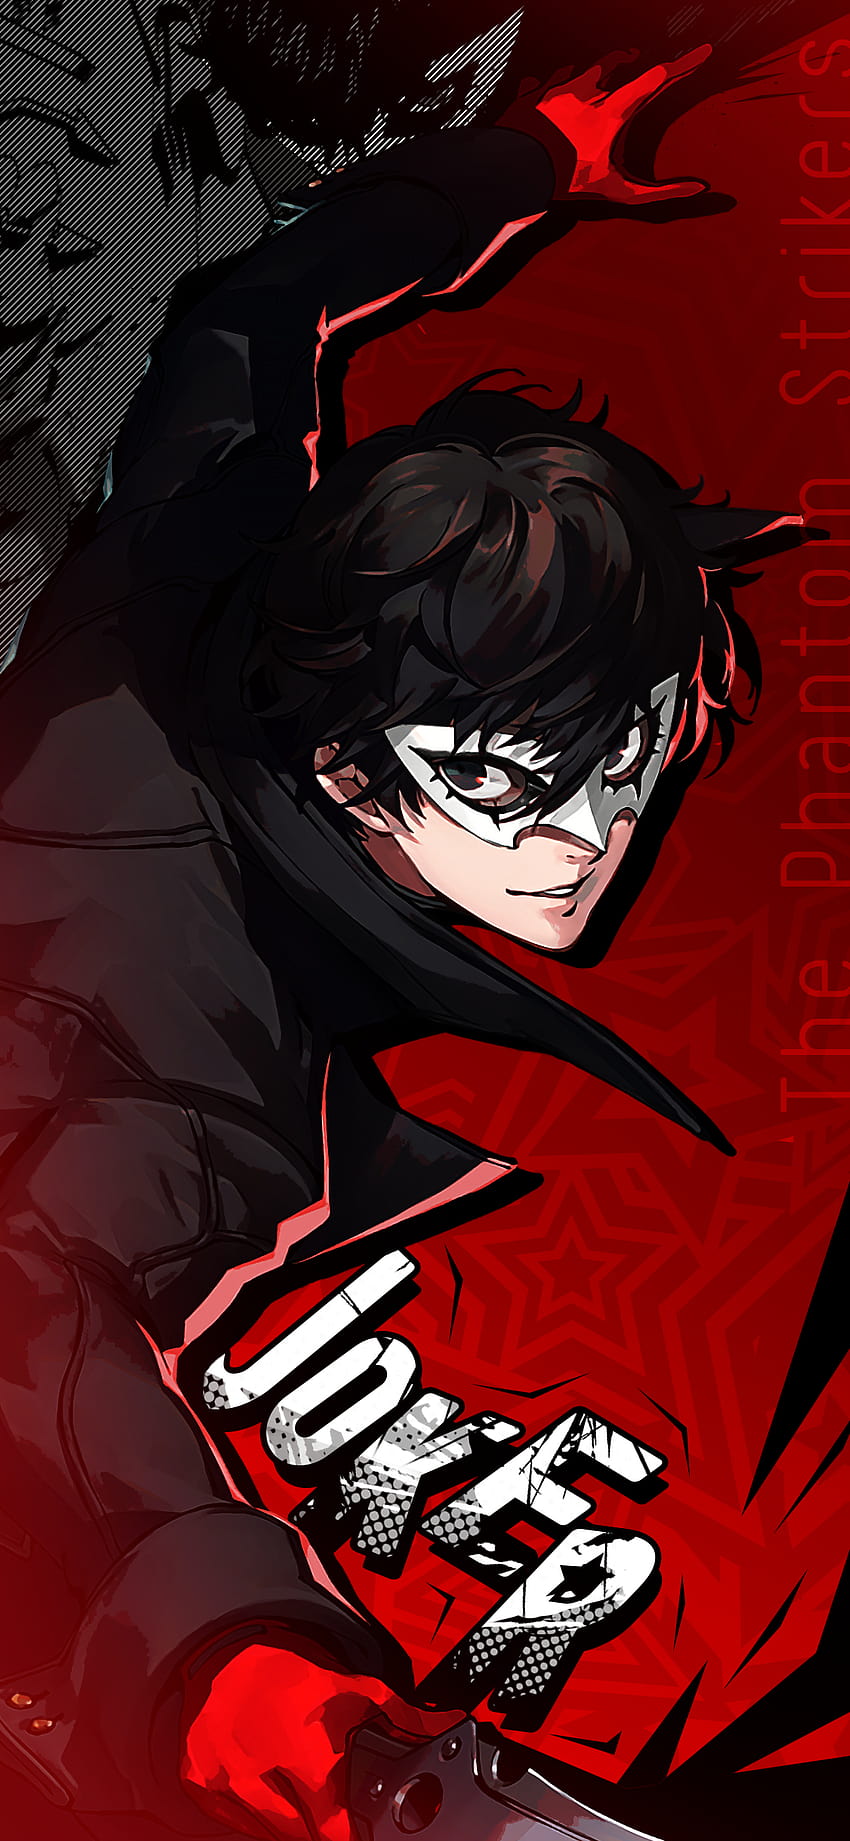 HD persona 5 royal wallpapers  Peakpx